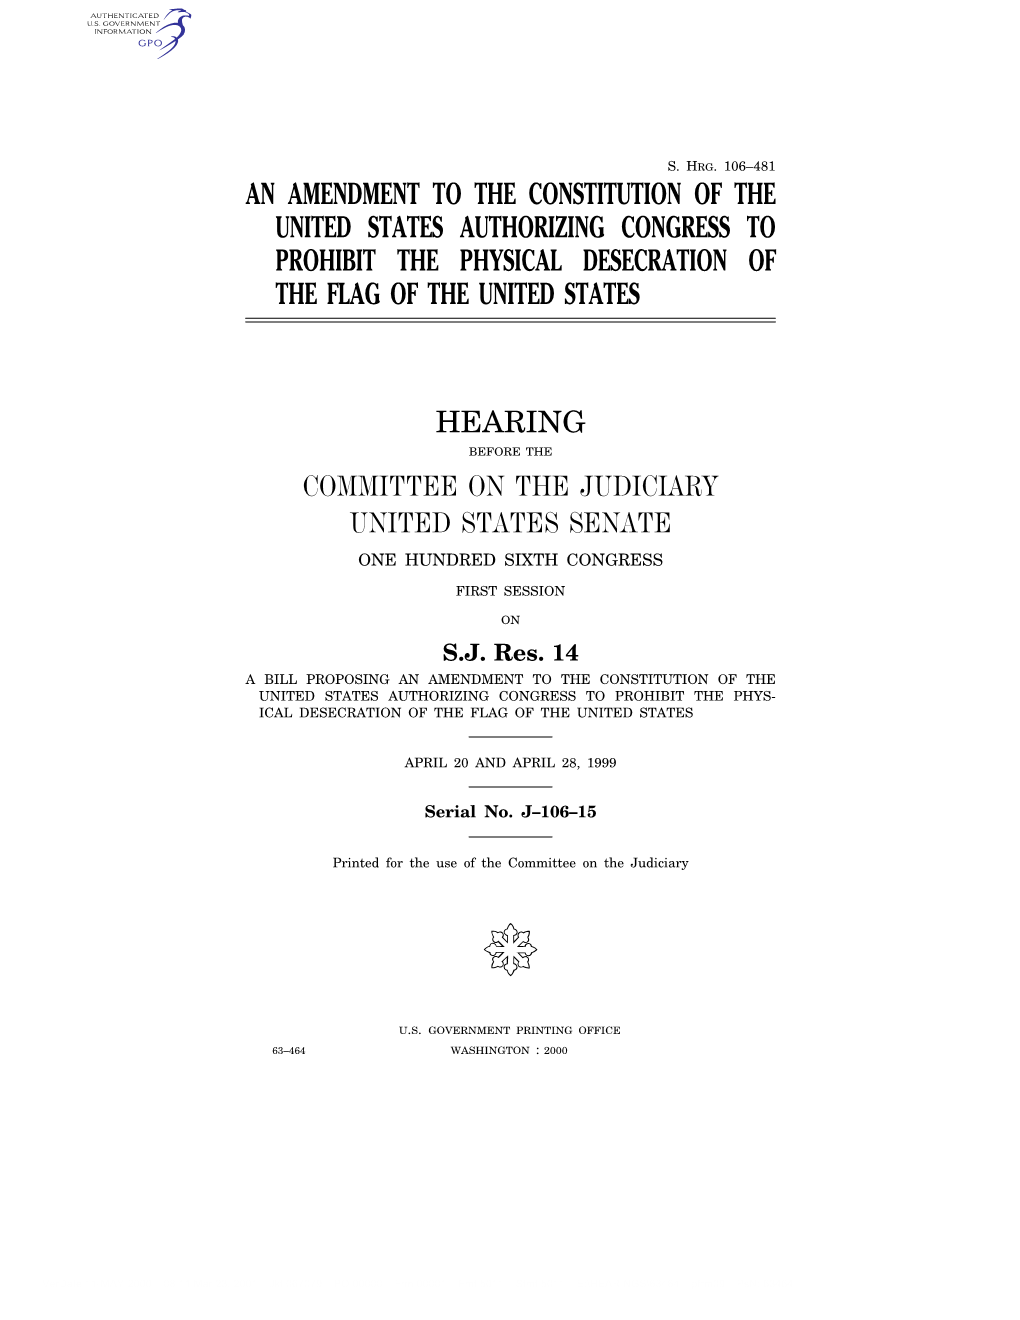 An Amendment to the Constitution of the United States Authorizing Congress to Prohibit the Physical Desecration of the Flag of the United States